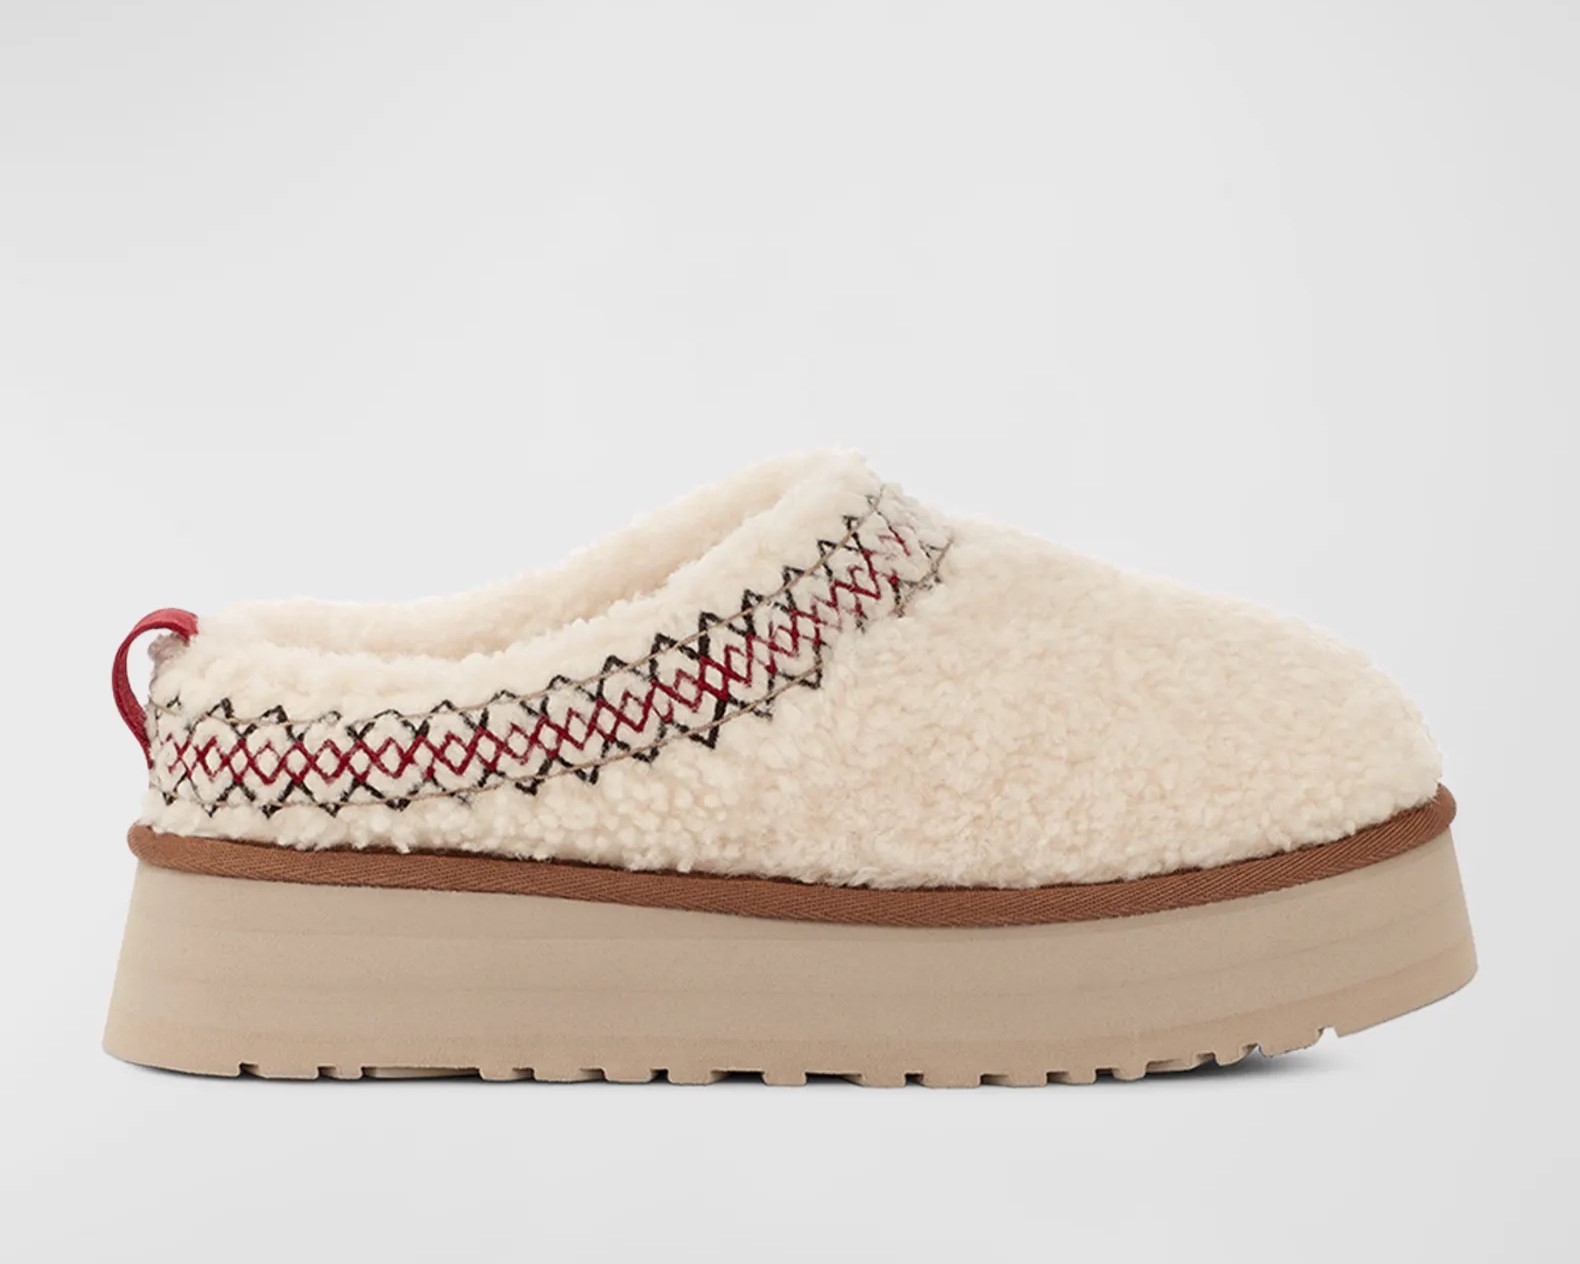 Tazz Ugg Slippers - Facts.net